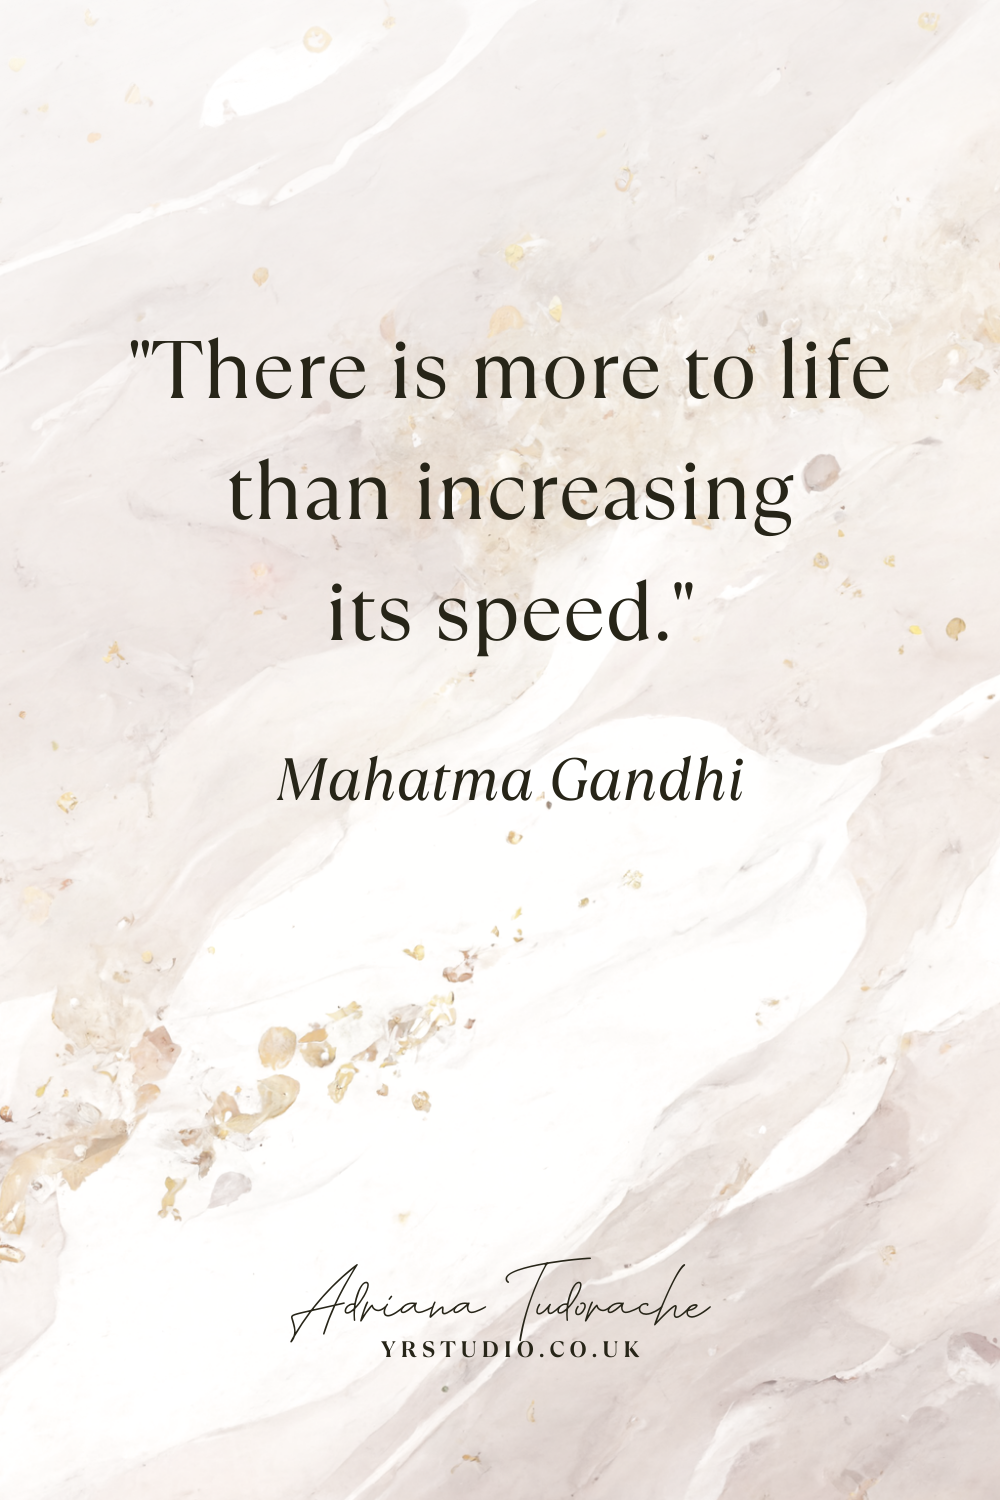 "There is more to life than increasing its speed." - Mahatma Gandhi